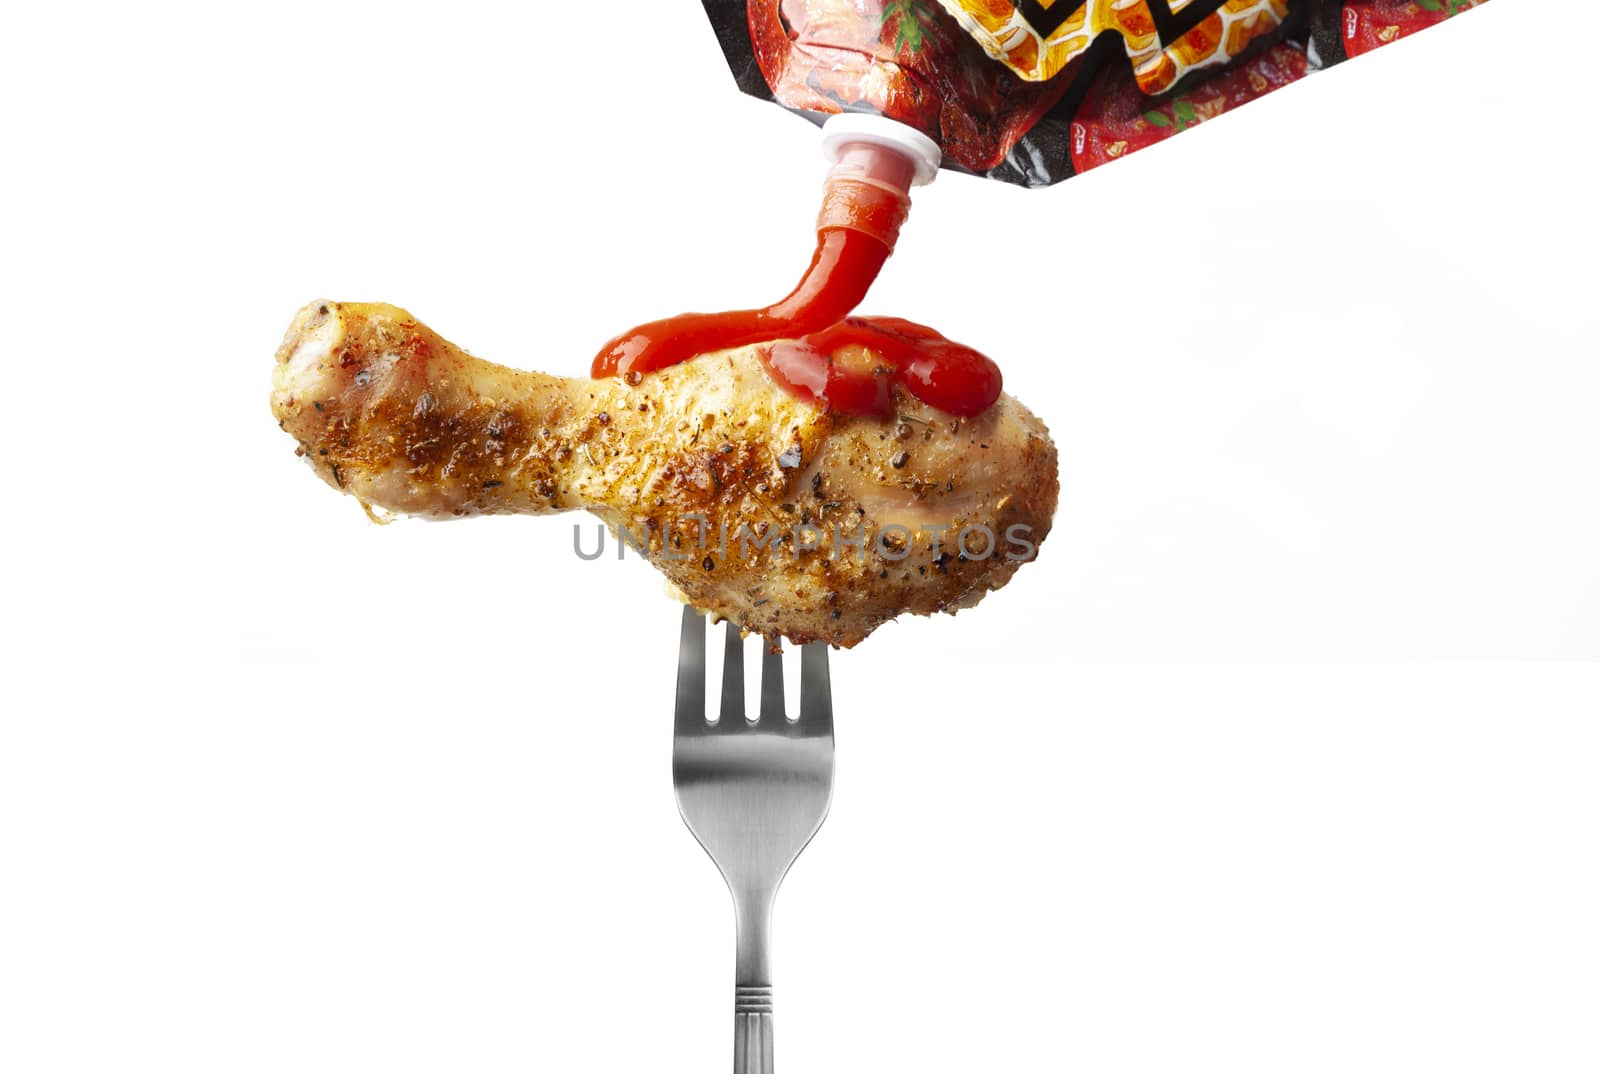 Chicken leg with ketchup on a fork isolated on white background